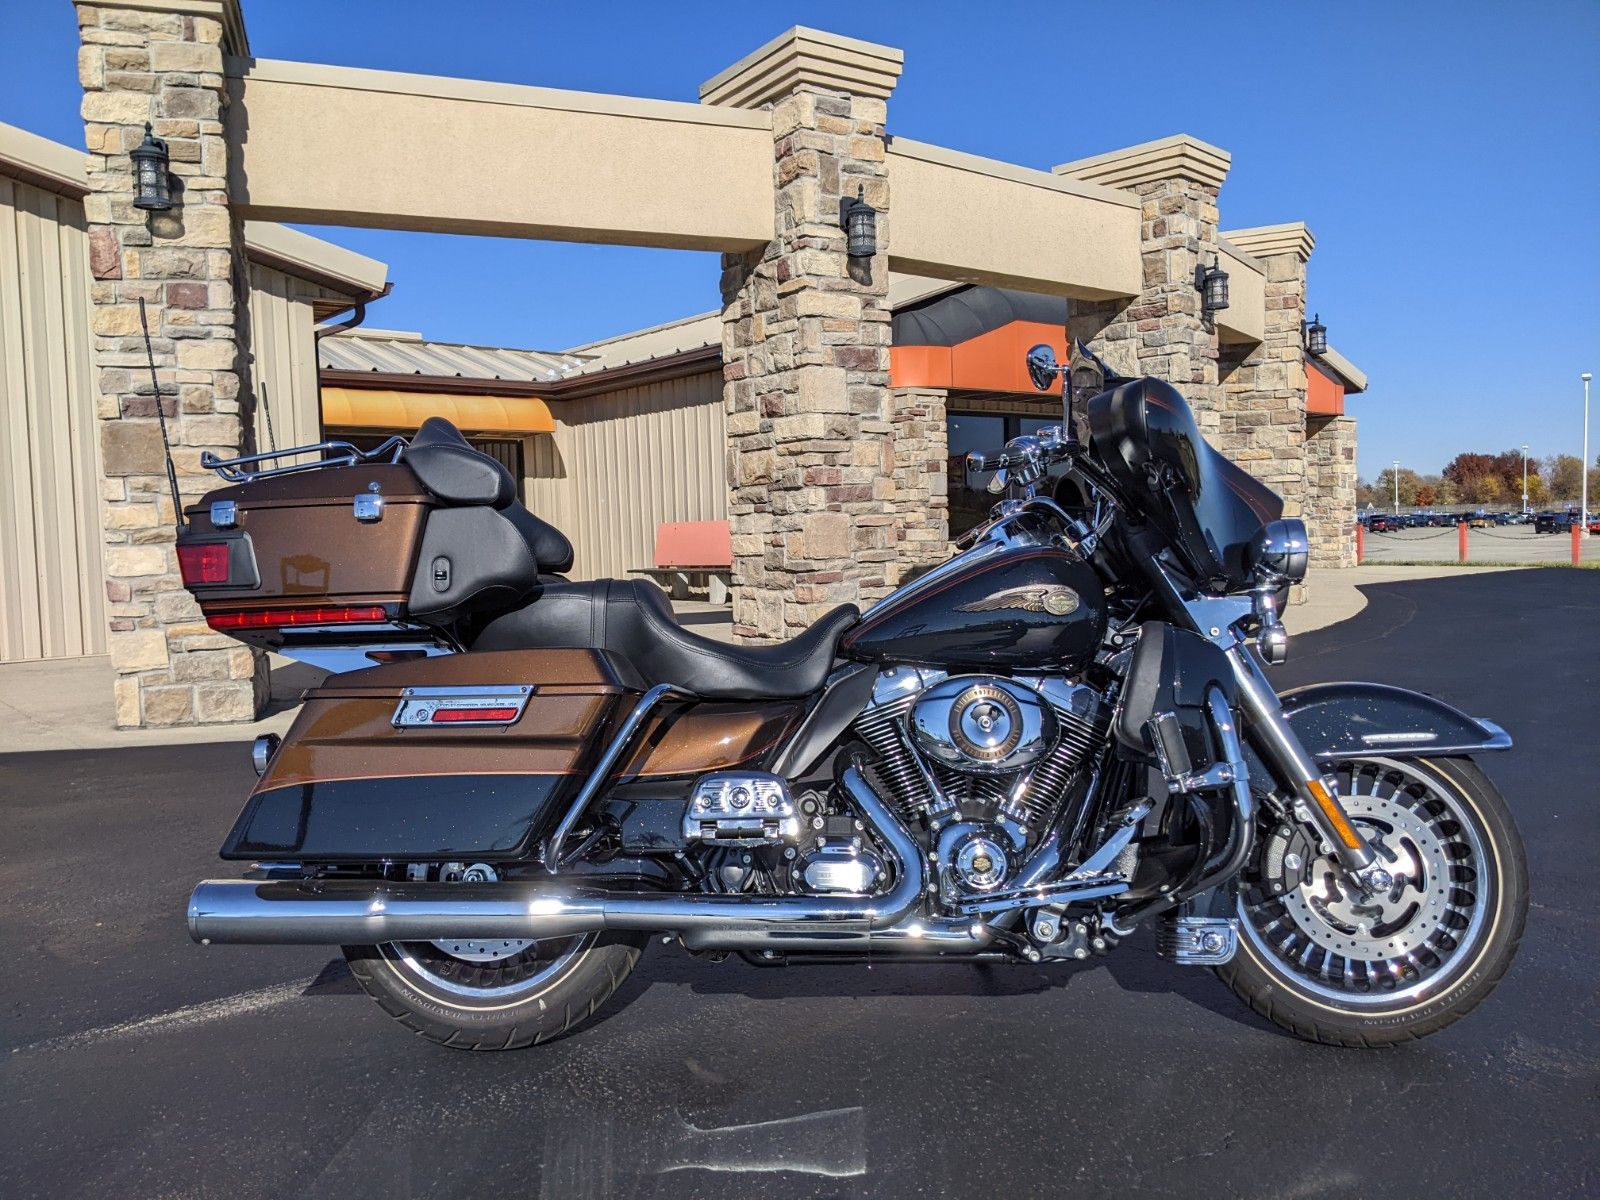 2013 Harley-Davidson Electra Glide® Ultra Limited 110th Anniversary Edition in Muncie, Indiana - Photo 1